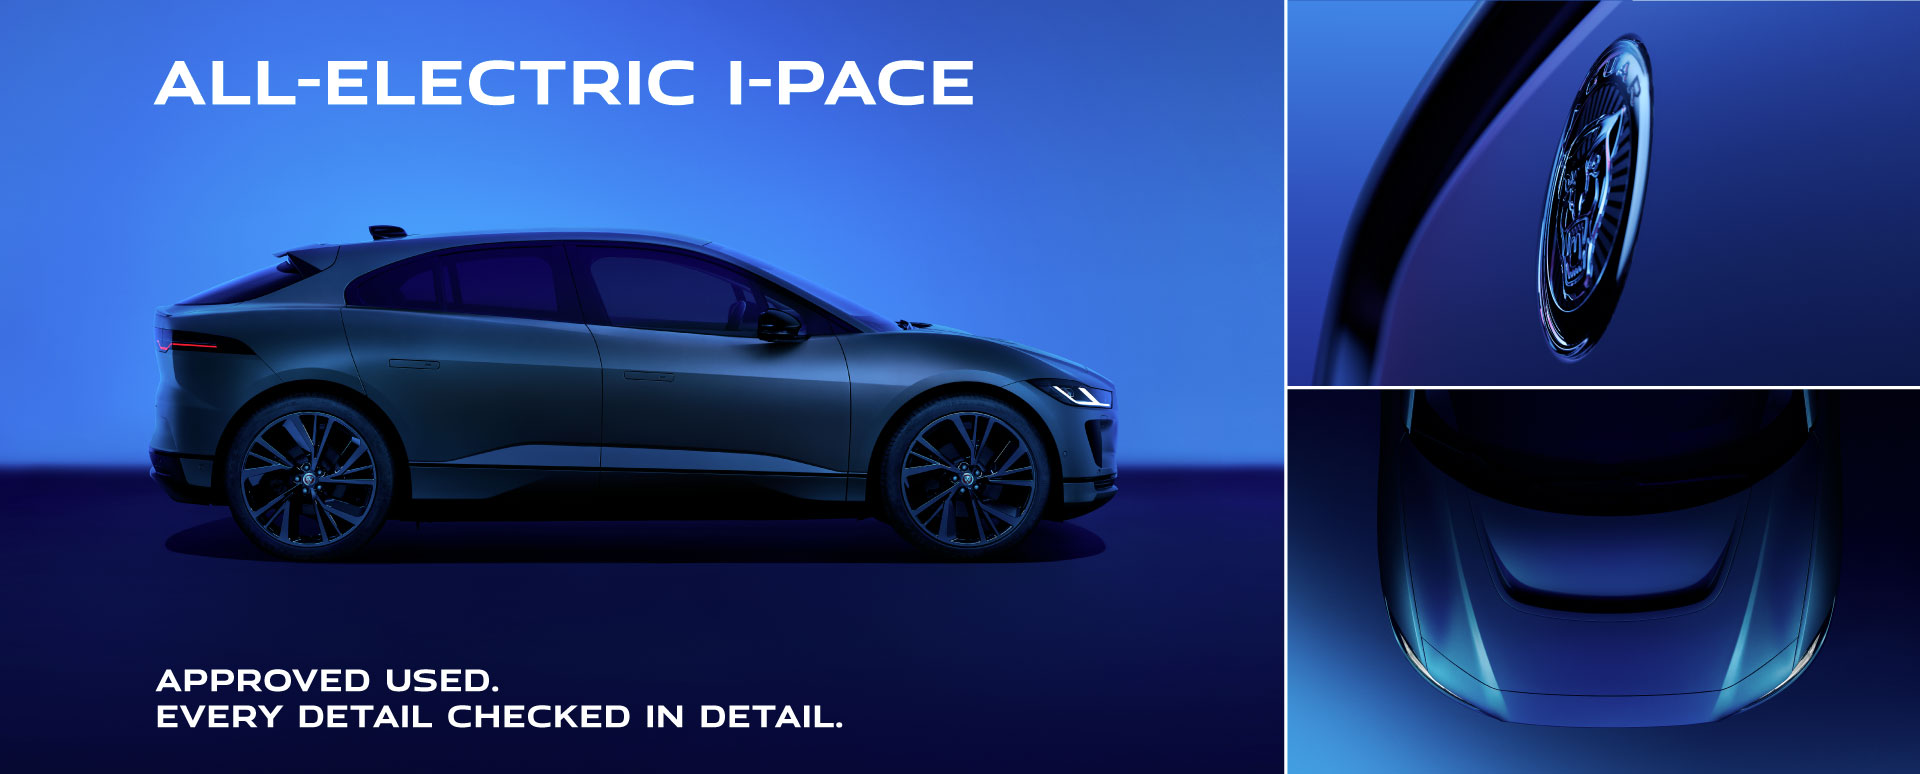 Jaguar I-PACE Approved Used